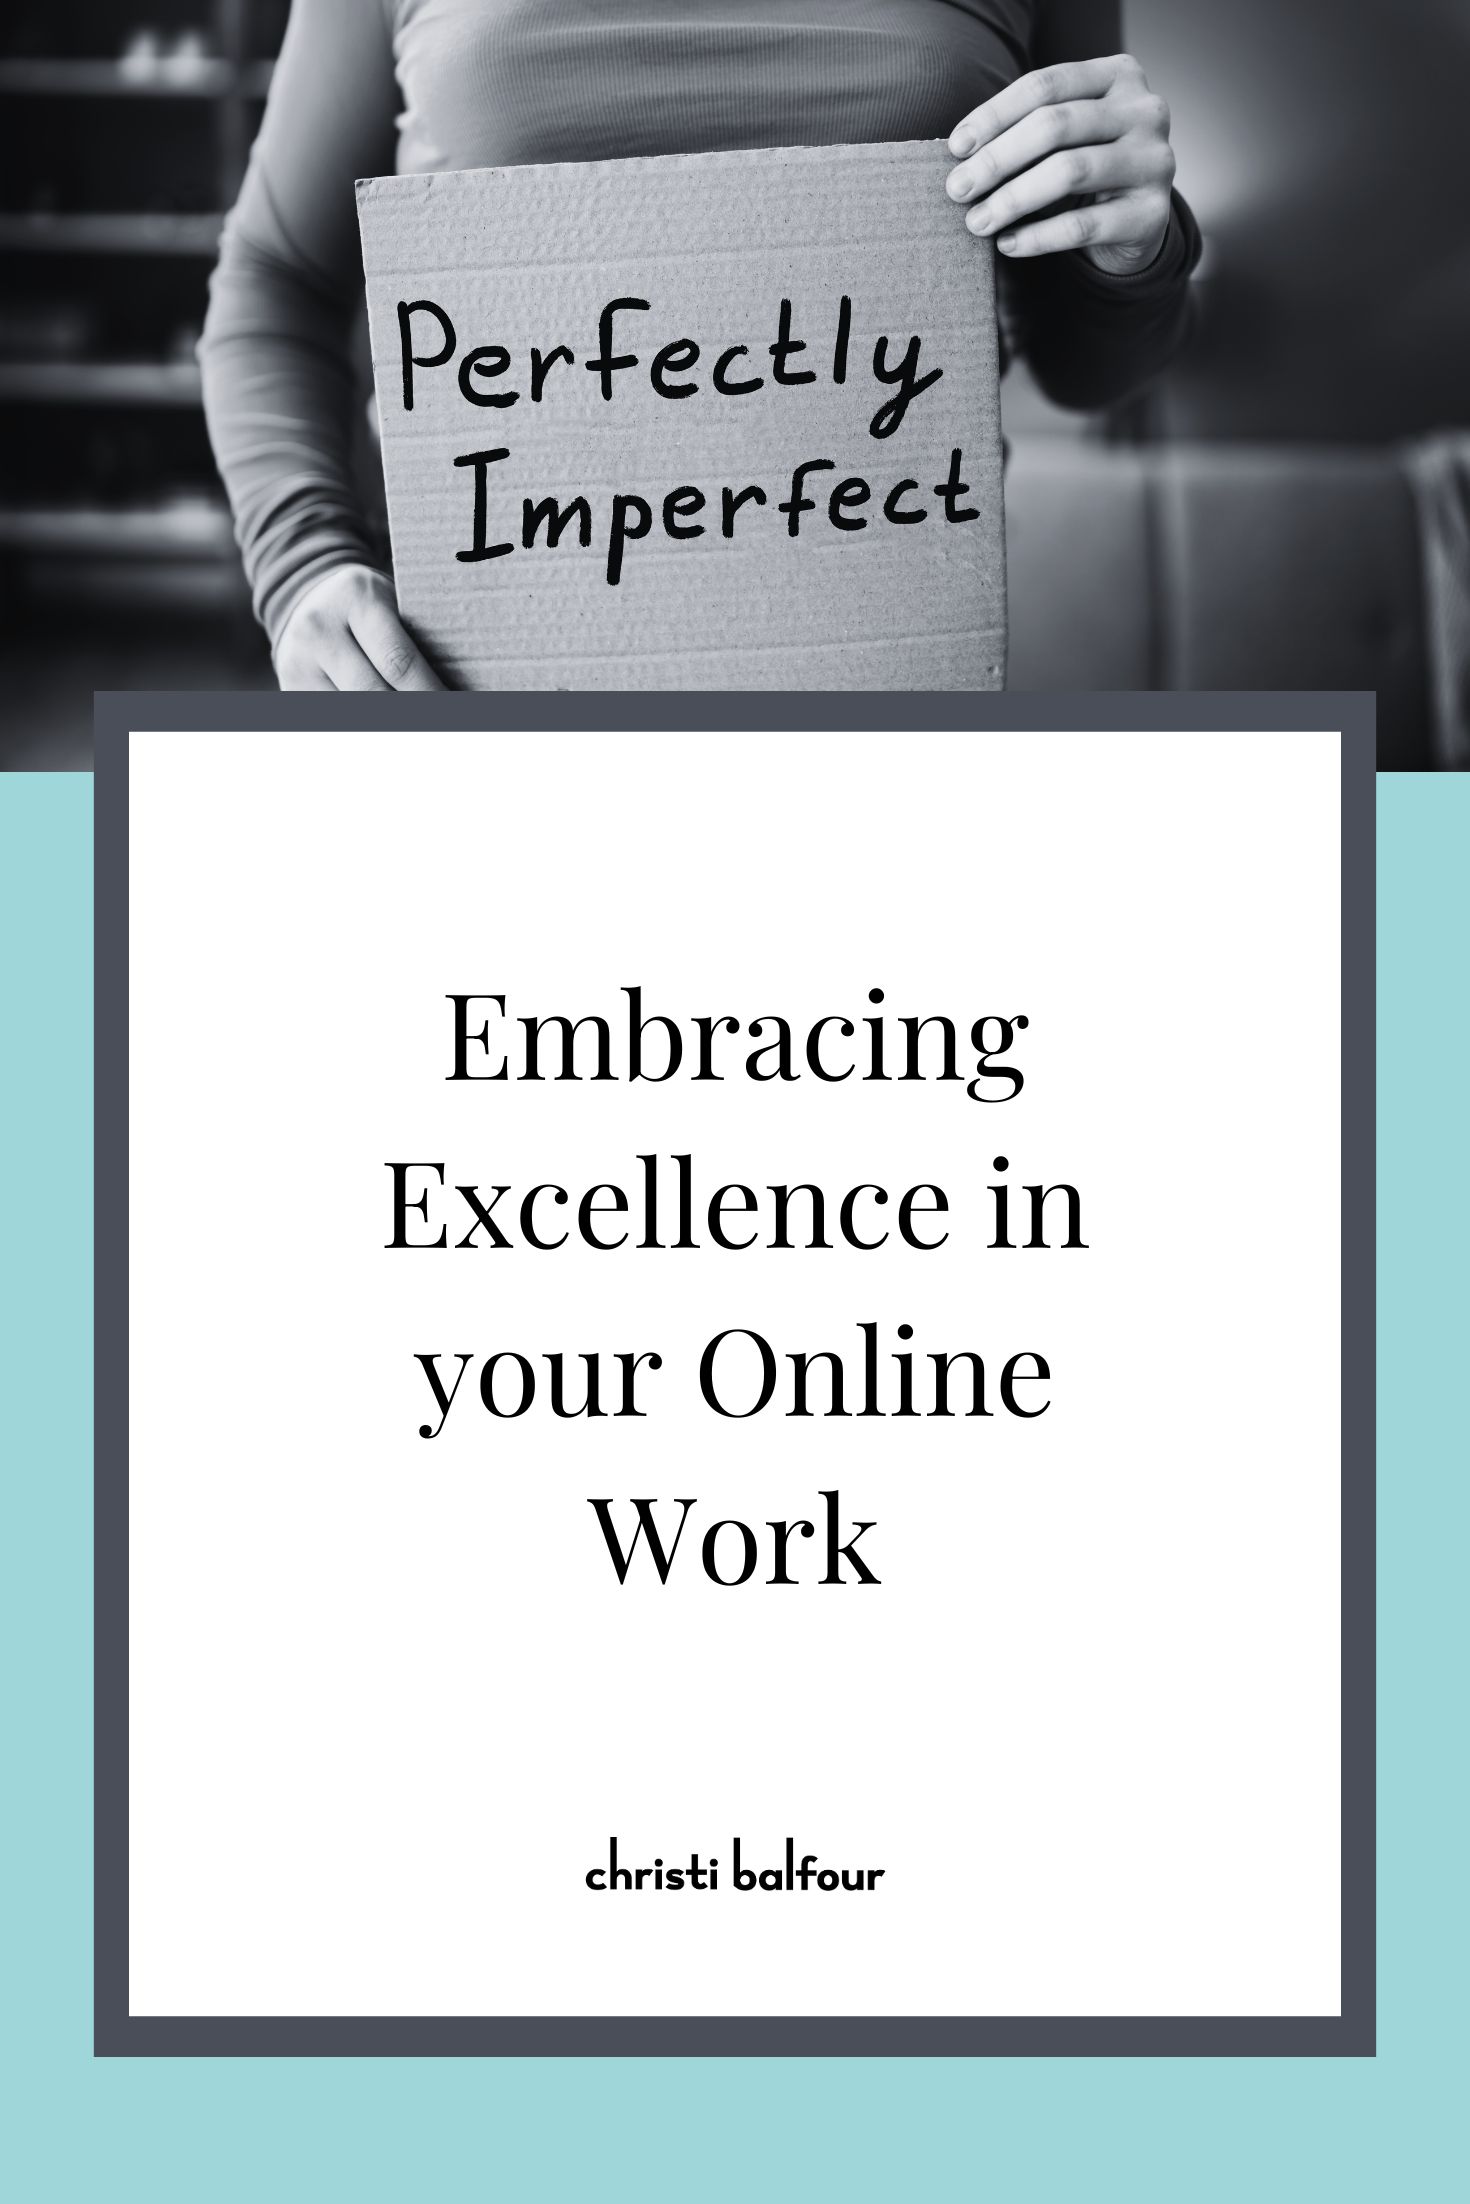 A woman in grayscale holding a cardboard sign with the phrase 'Perfectly Imperfect' written in black marker. The image promotes the concept of accepting and celebrating imperfections in virtual assistance work. The book cover-like design includes the title 'Embracing Excellence in your online Work' by Christi Balfour.